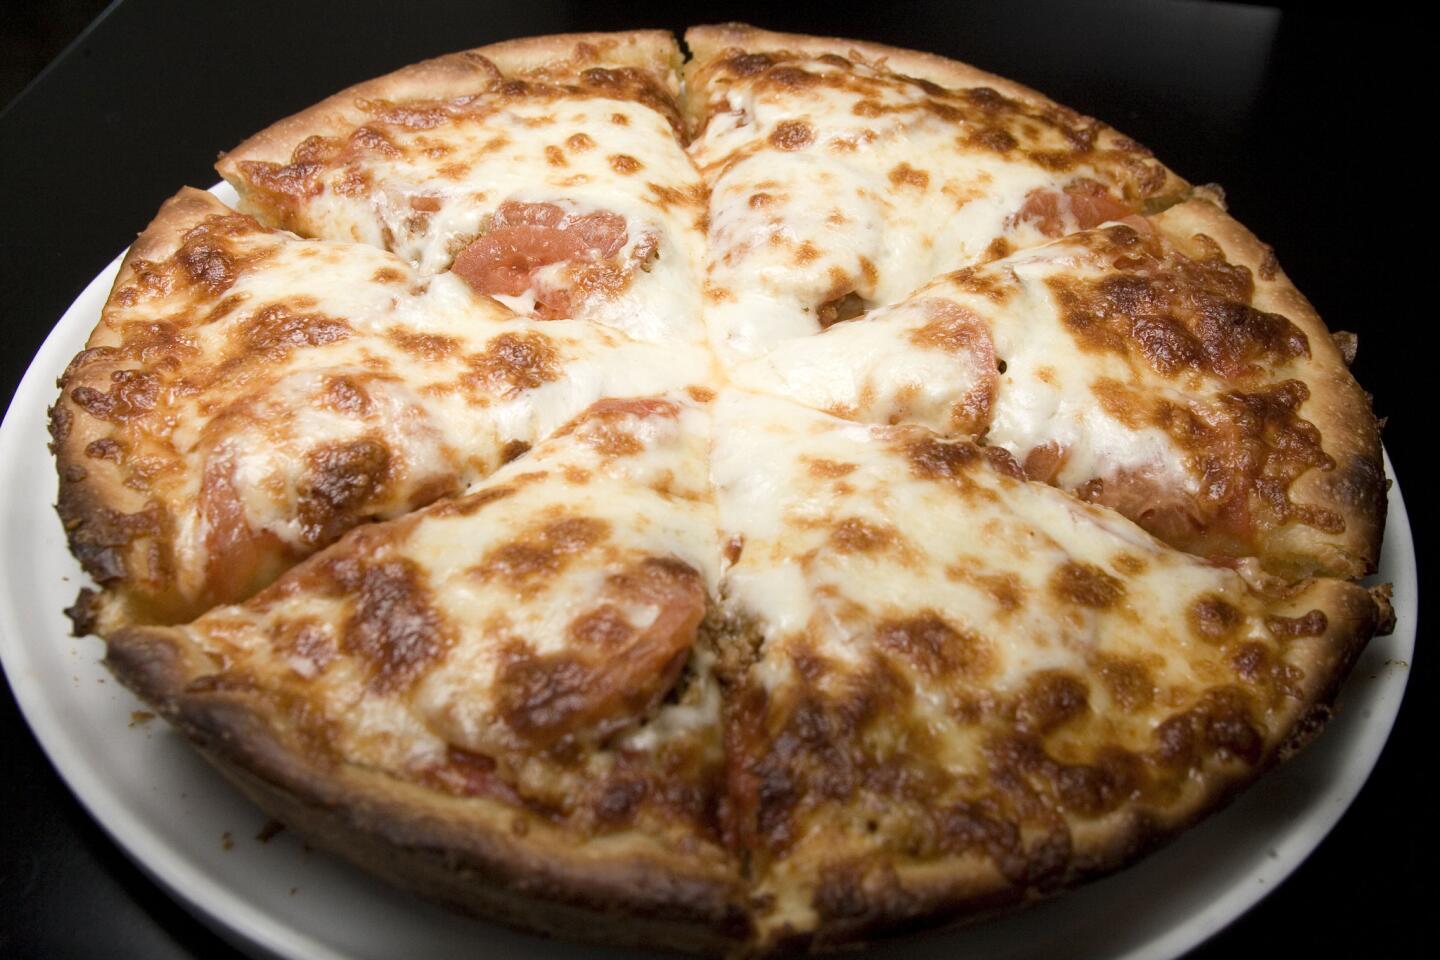 Prizzi's Adam's Special is made with ground beef, tomatoes, pepperoni and melted mozzarella. Prizzi's relocated from Hollywood to Burbank in August 2011. The restaurant and bar has been in business for the last 22 years and is family owned by Barry and Larry Willner.